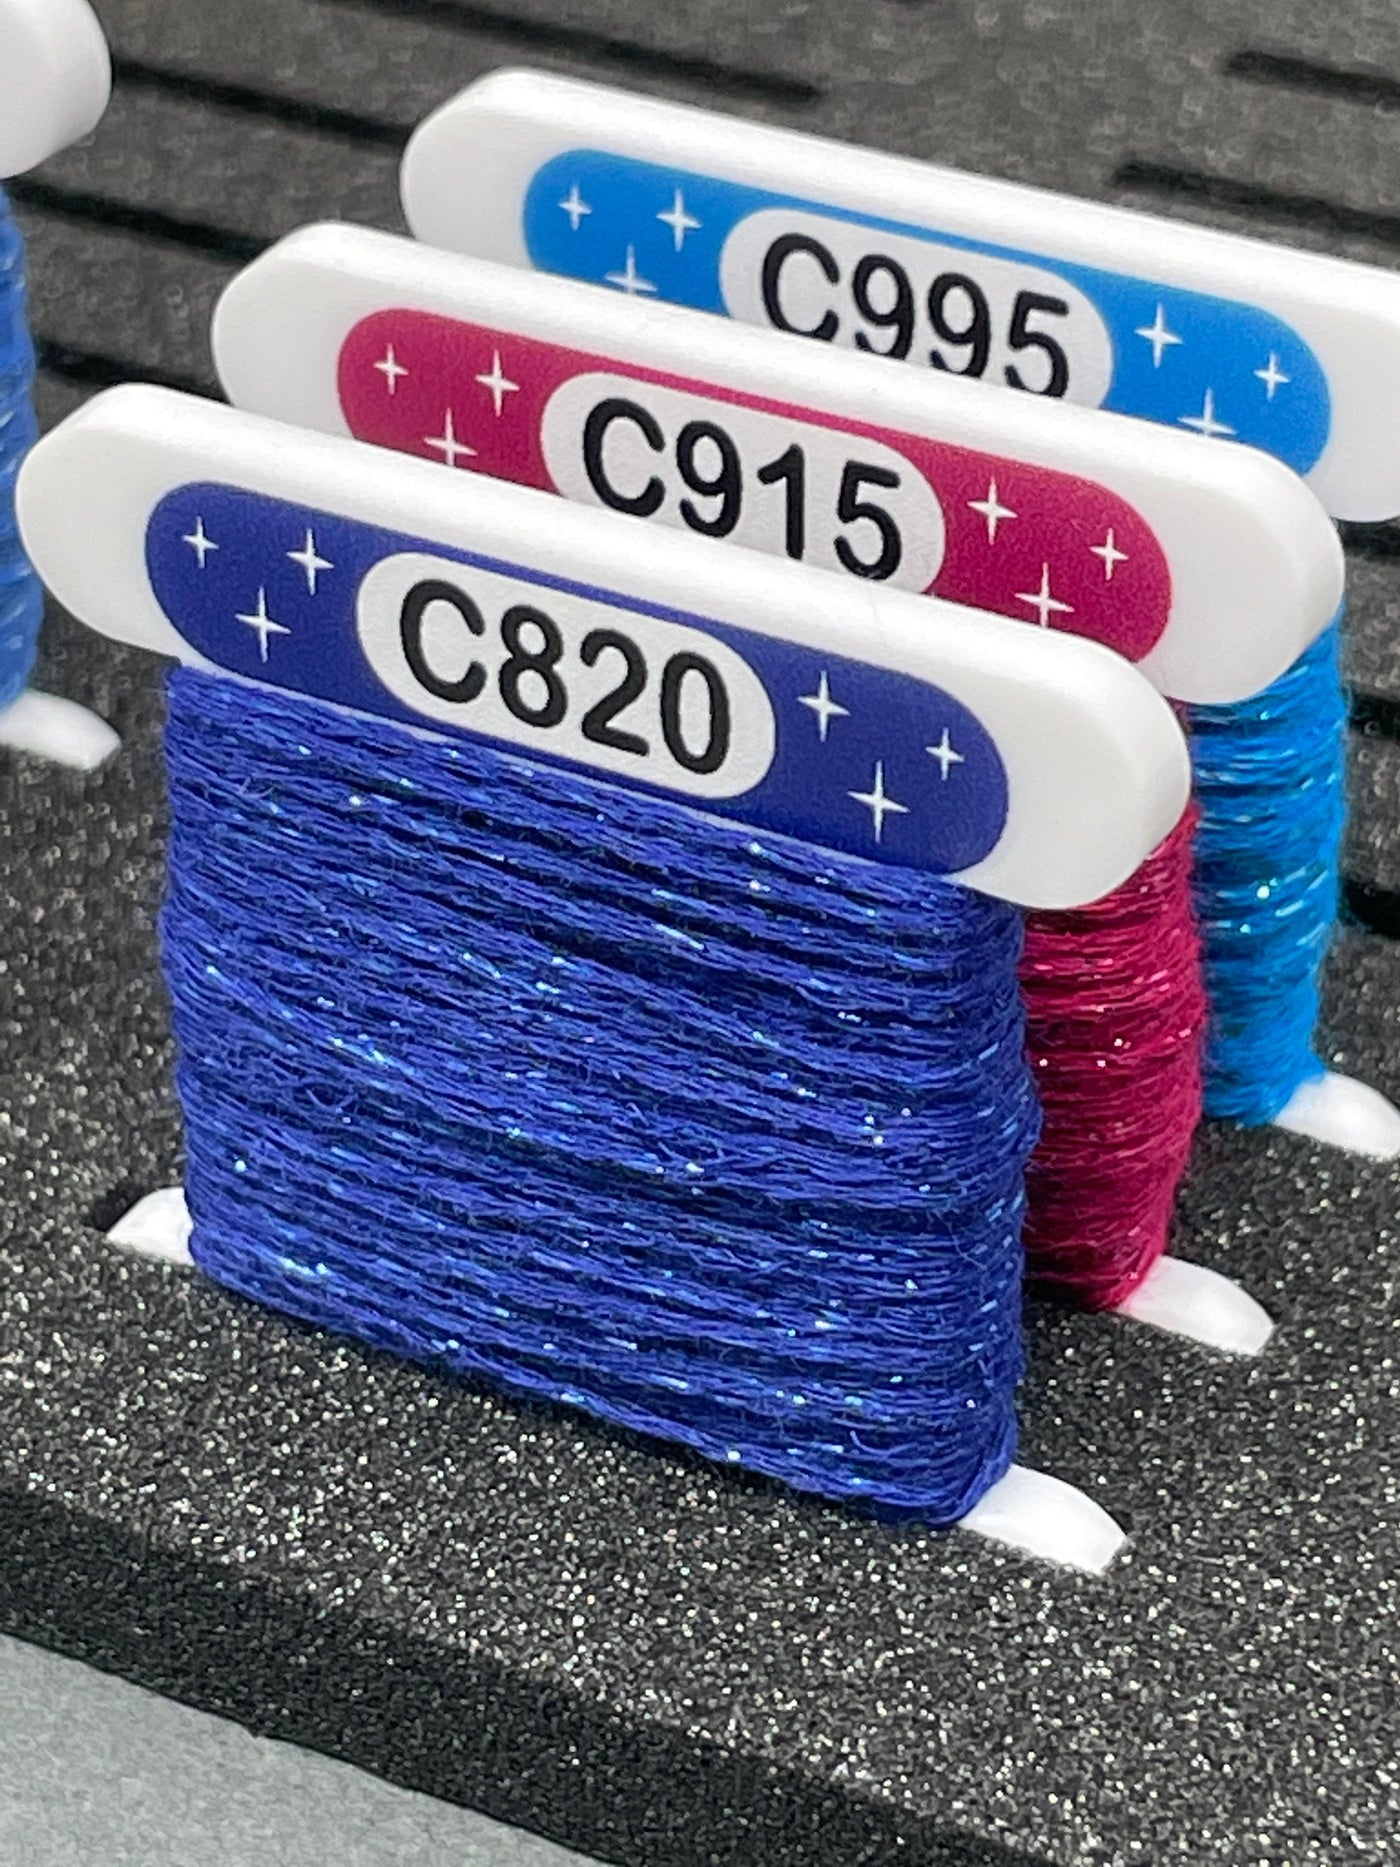 ETOILE - Acrylic bobbins for DMC Etoile threads with printed number and swatch (x35 bobbins)